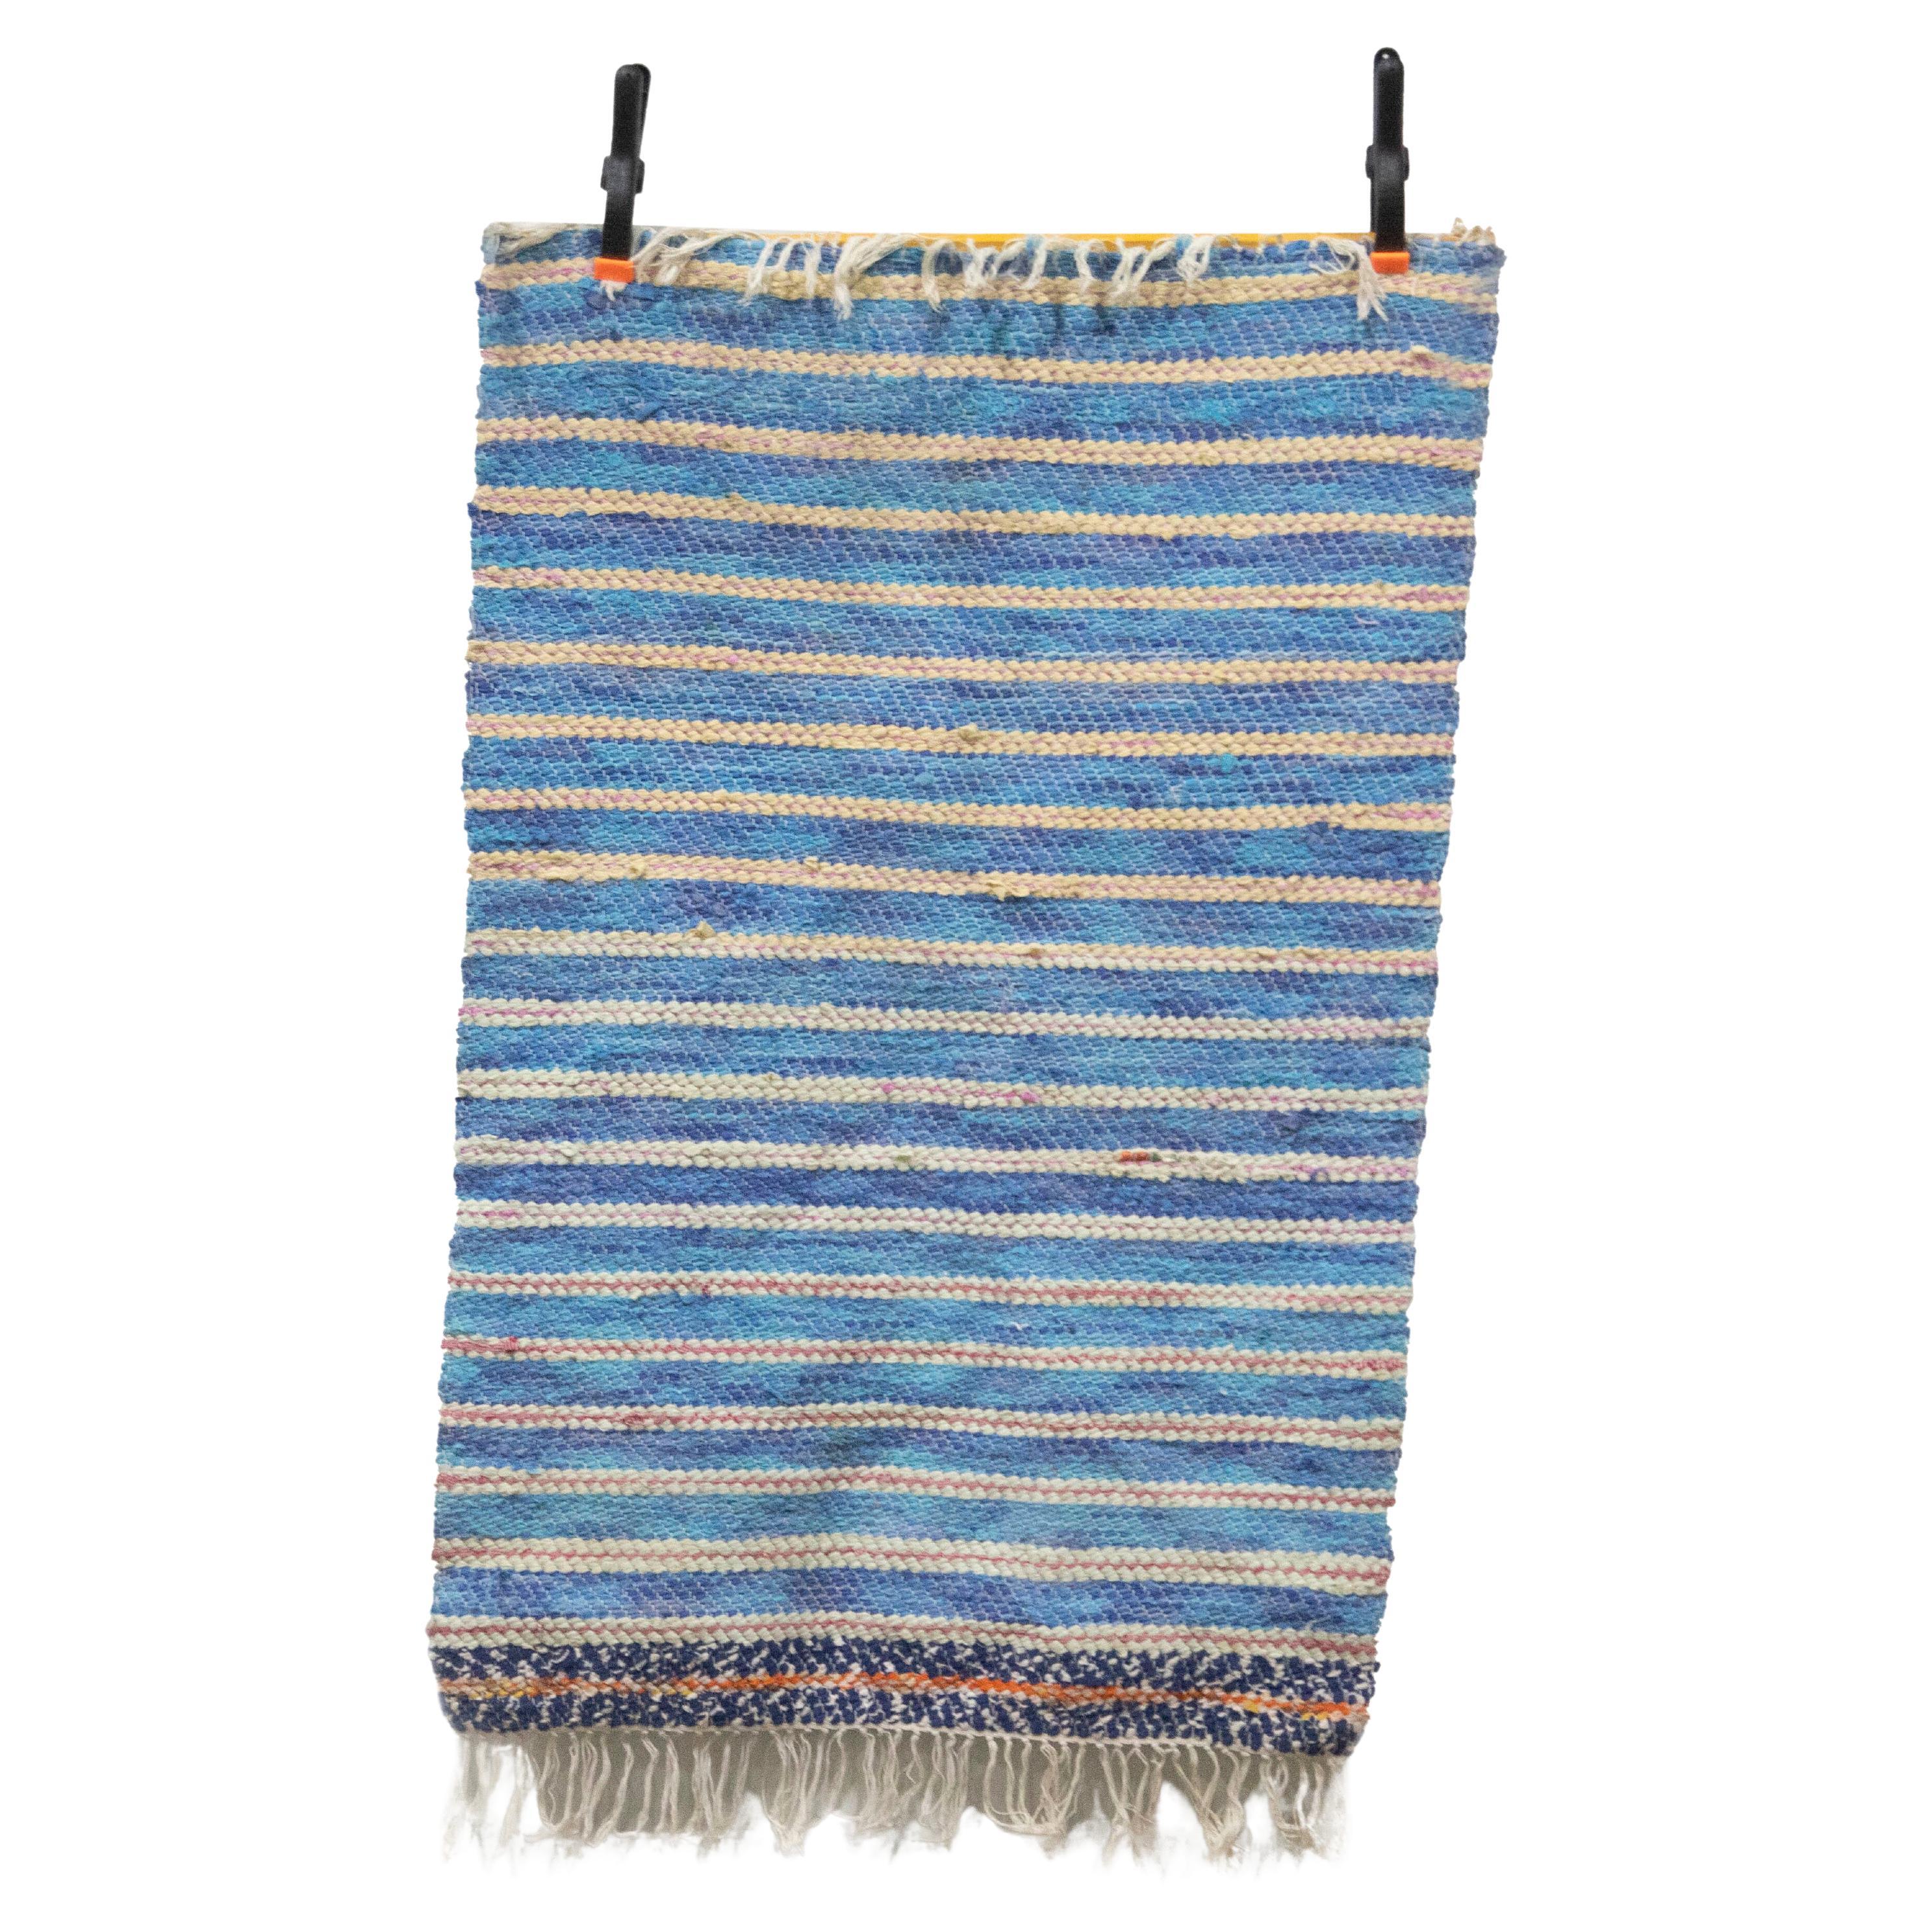 20th Century, a Set of Four Hand Woven Swedish Rag Rugs For Sale at 1stDibs